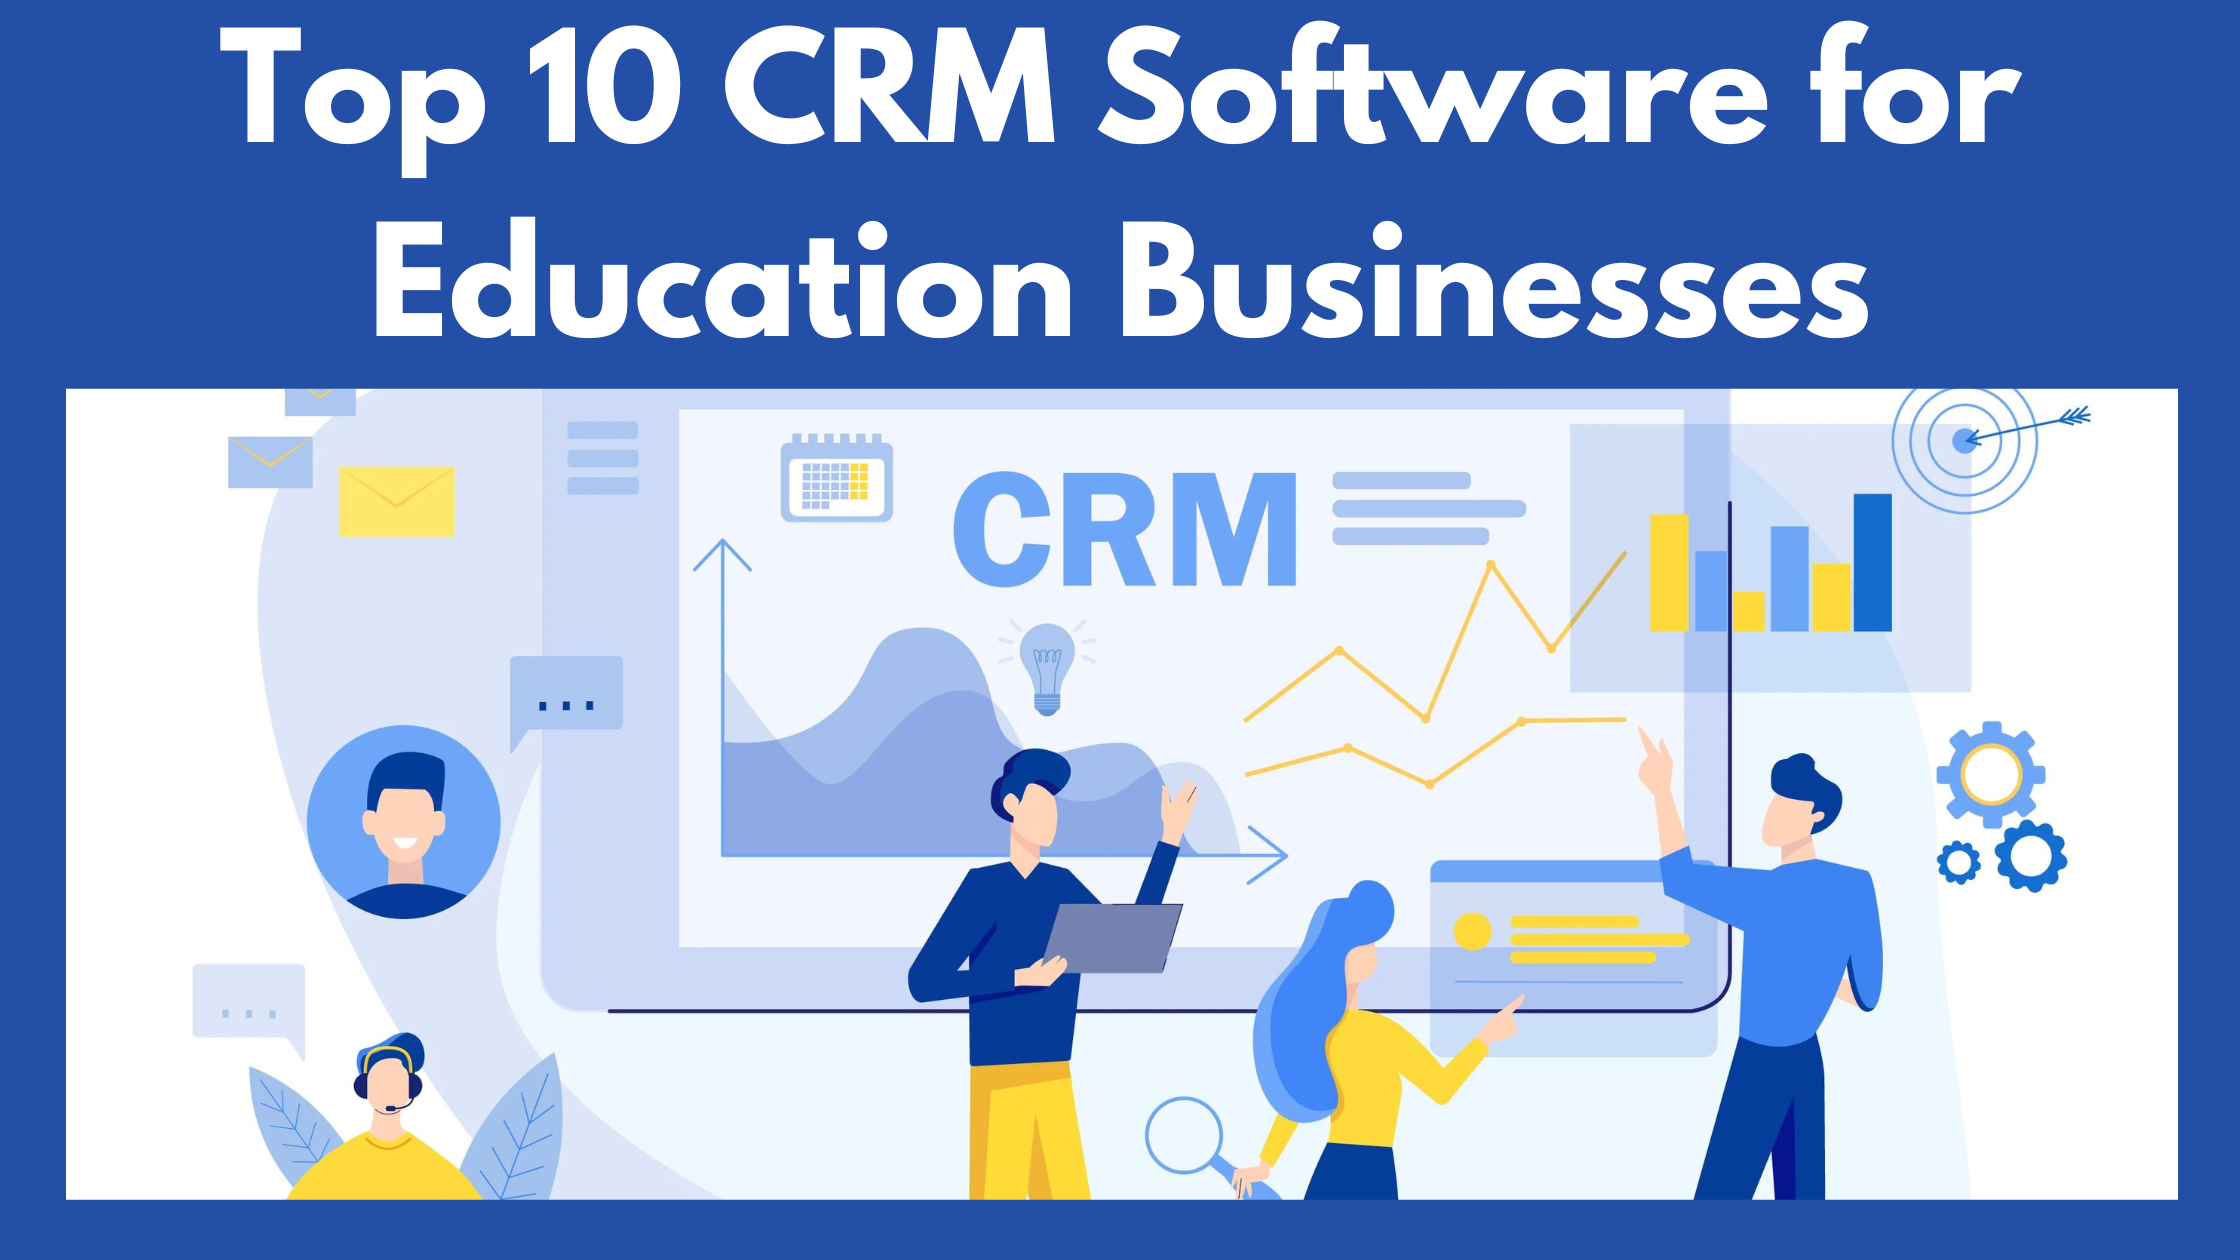 CRM Software for Education Businesses